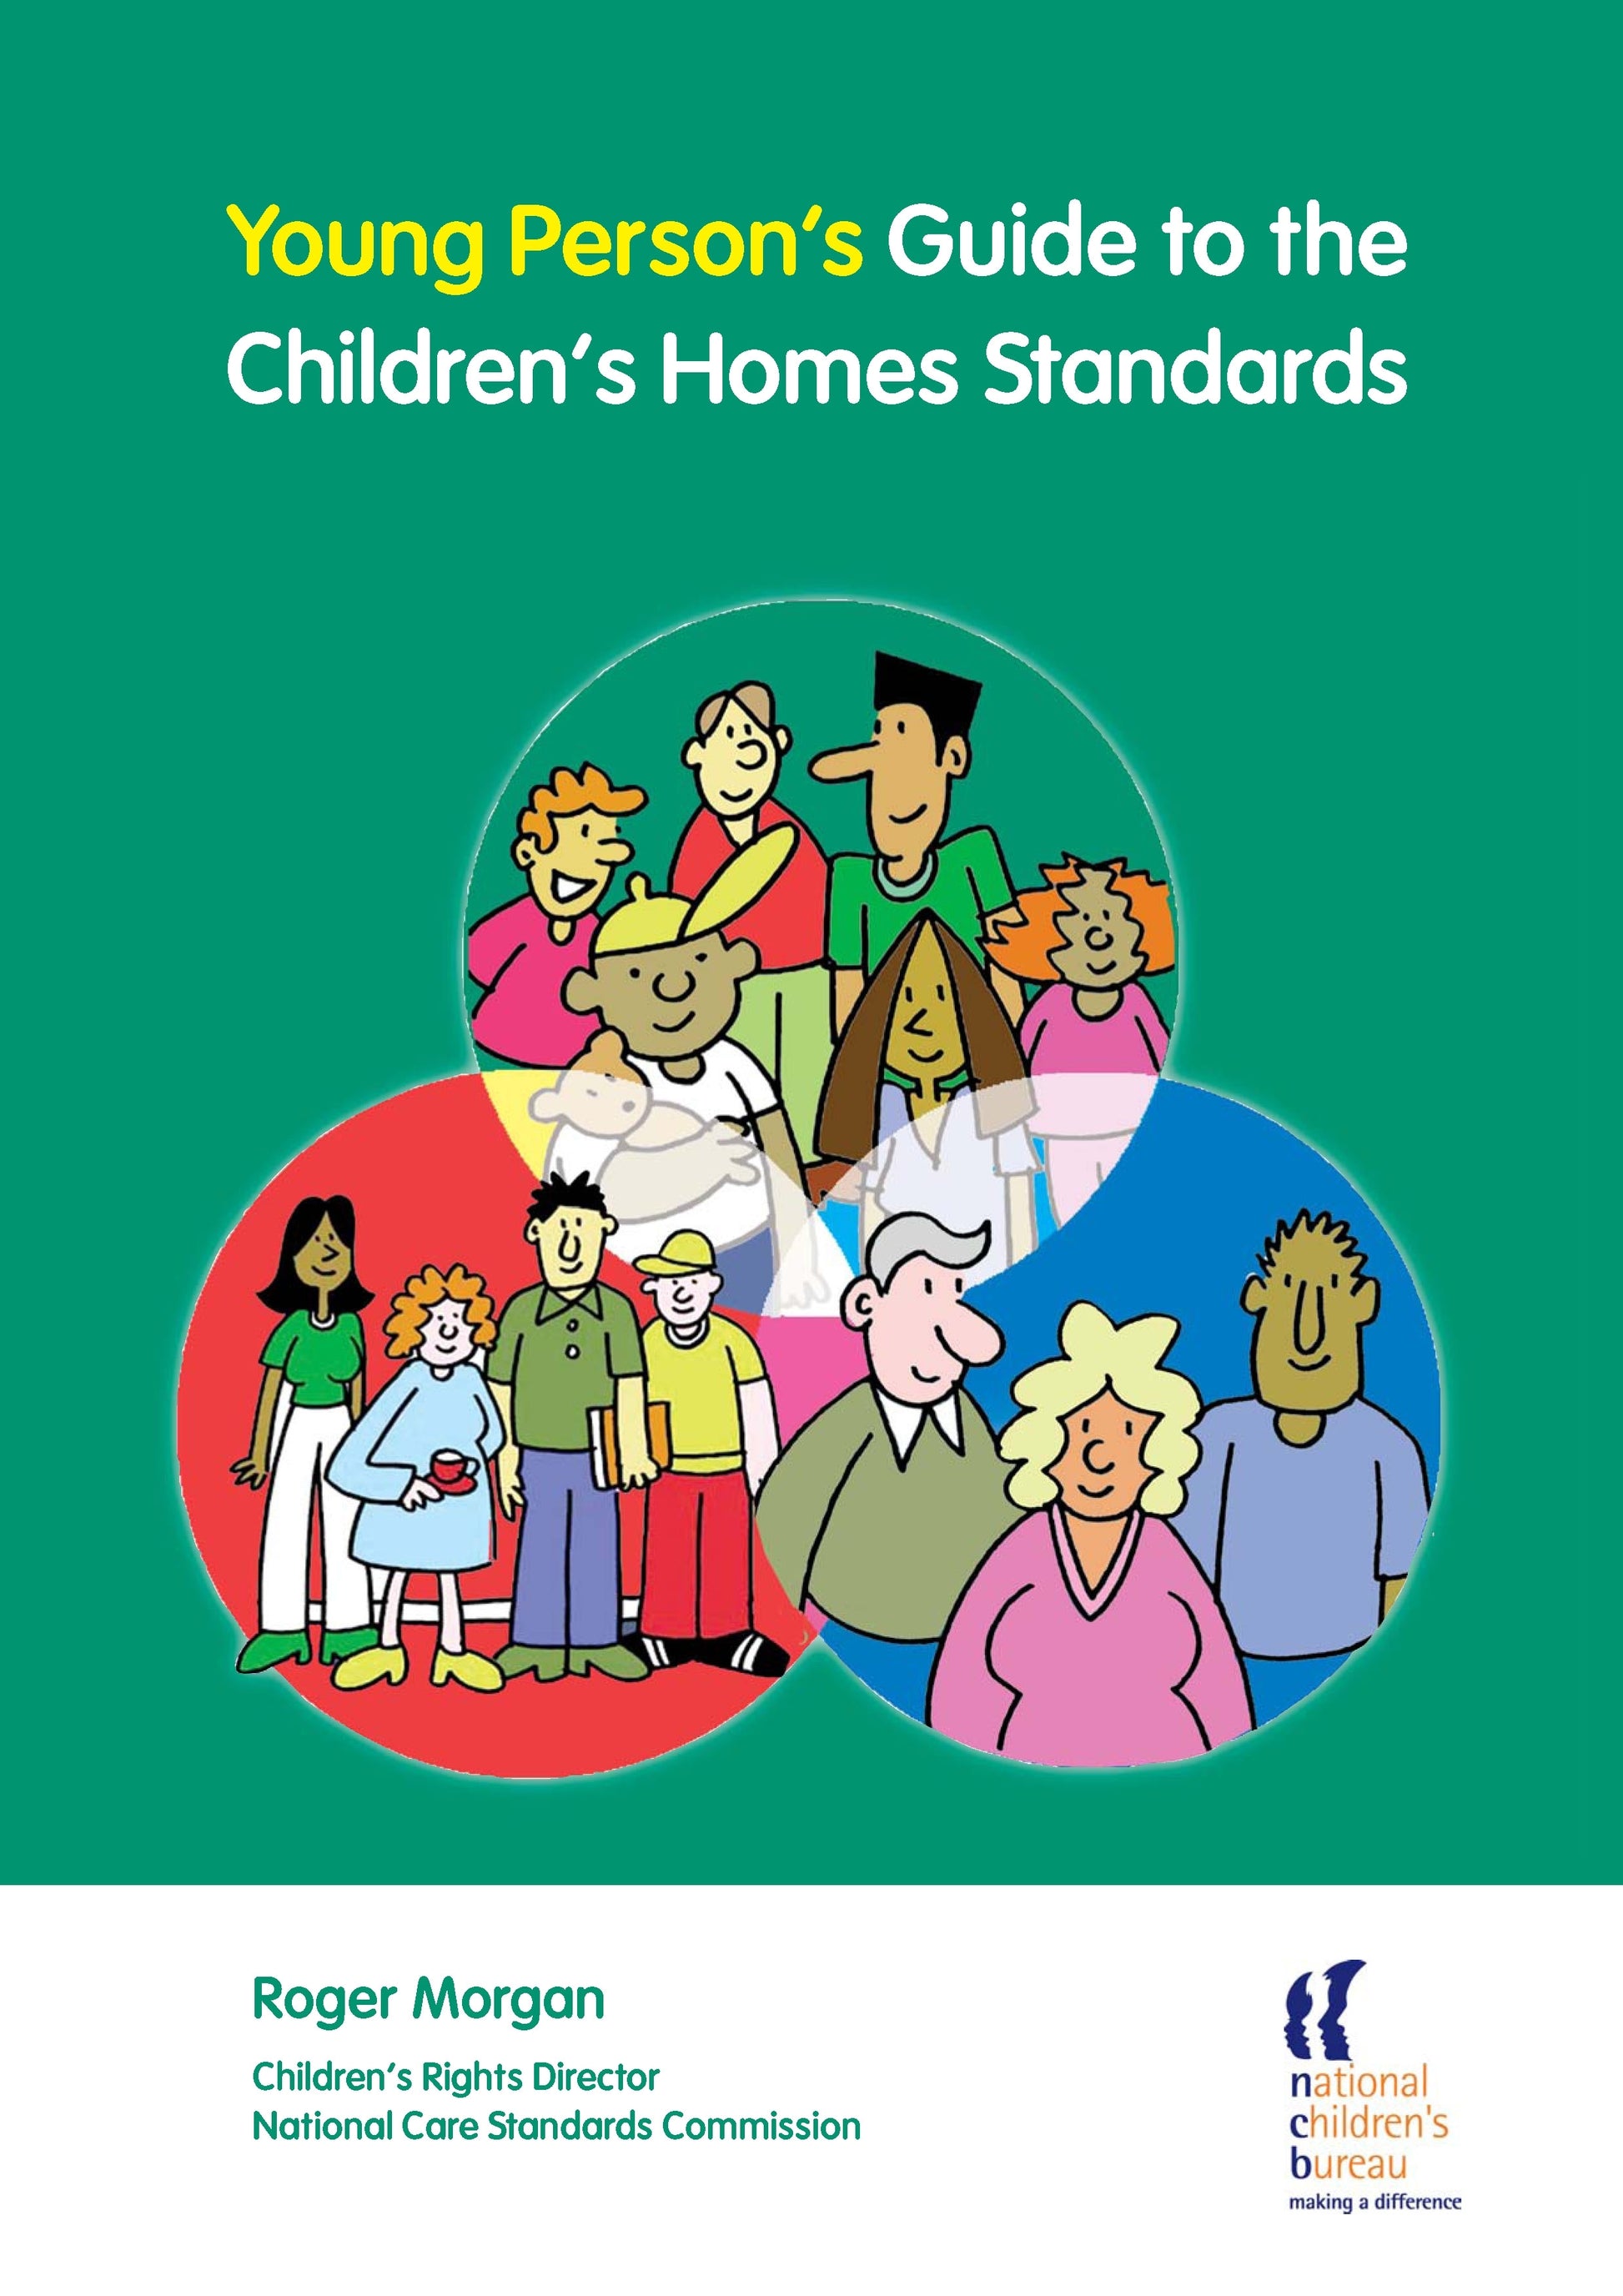 Young Person's Guide to the Children's Homes Standards by Roger Morgan